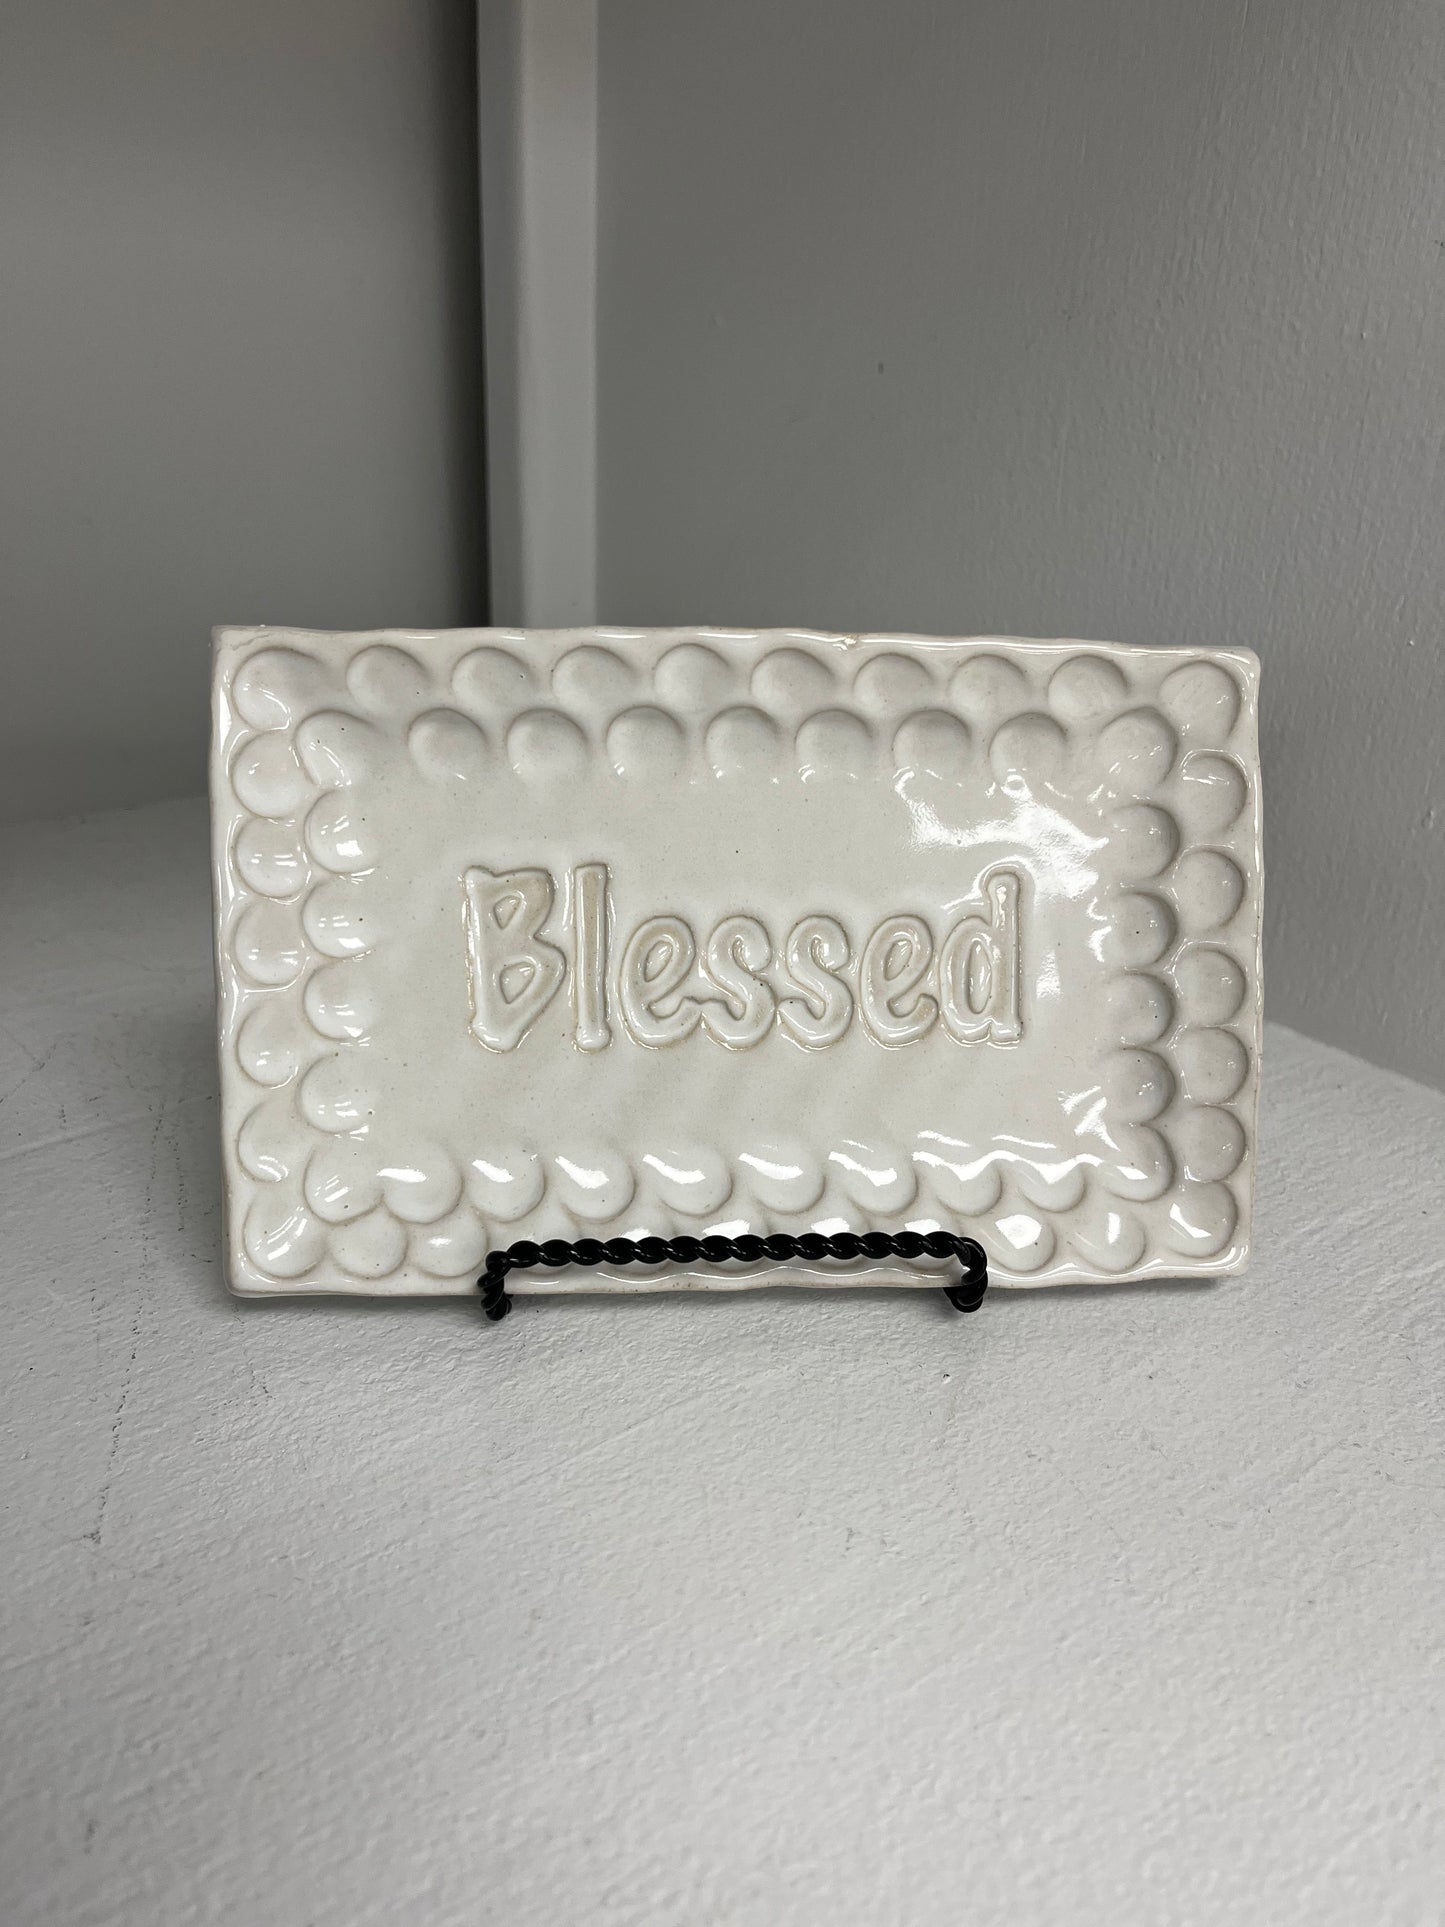 FP Rectangular "Blessed" Dish in High Cotton